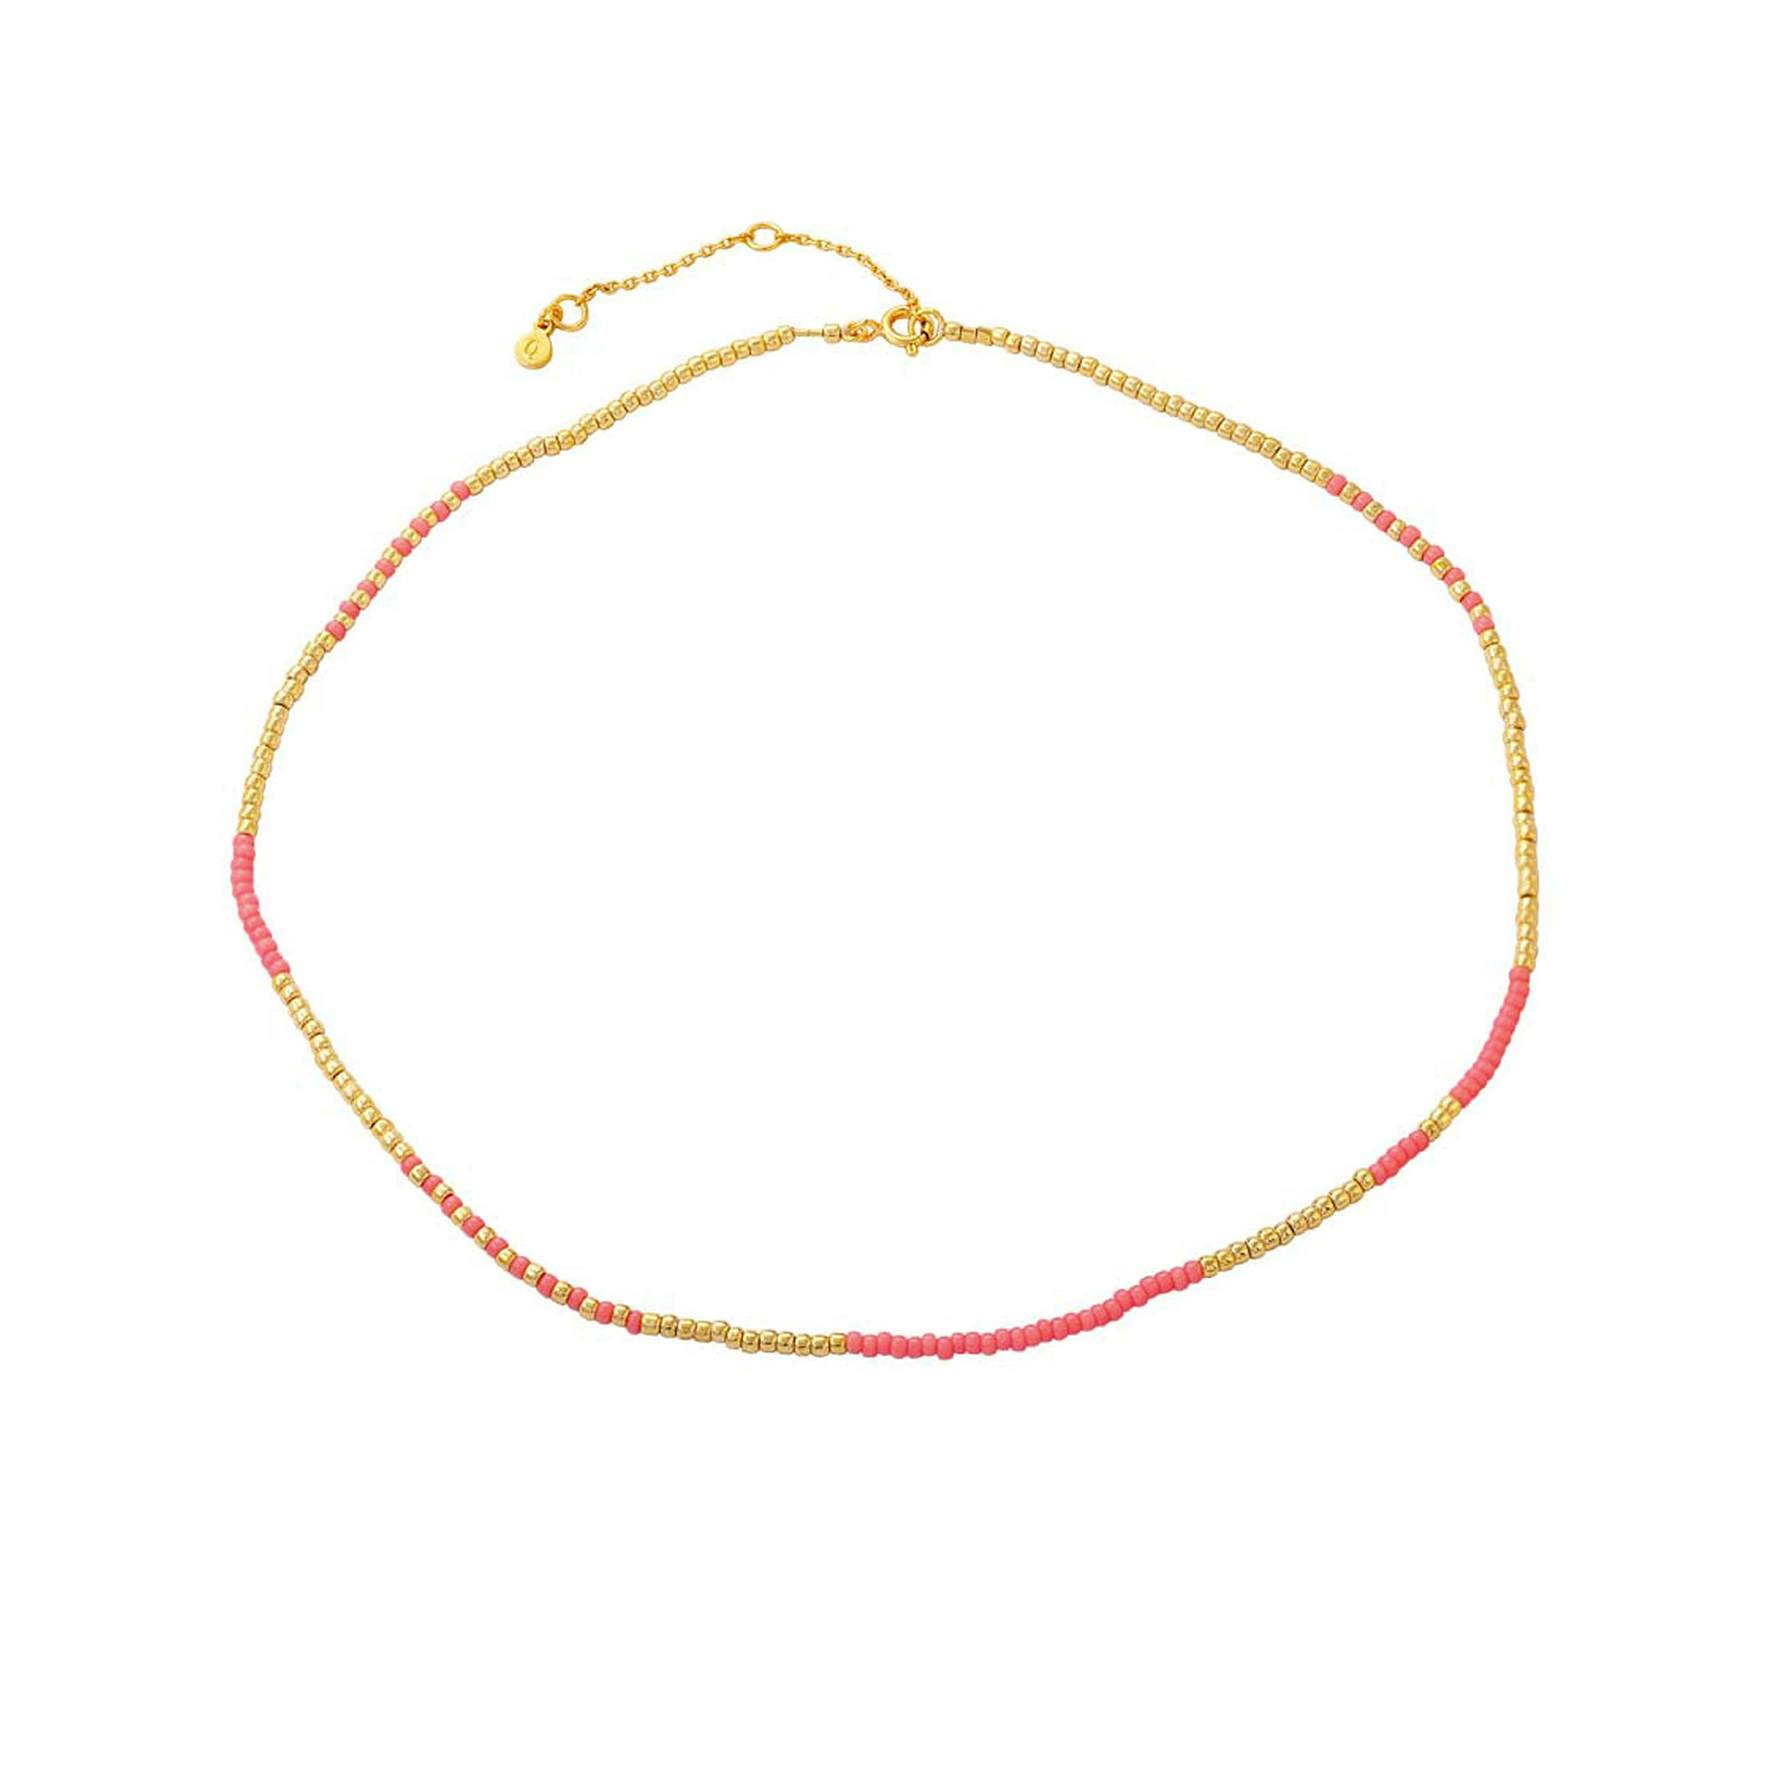 Elina Necklace from Hultquist Copenhagen in Goldplated-Silver Sterling 925